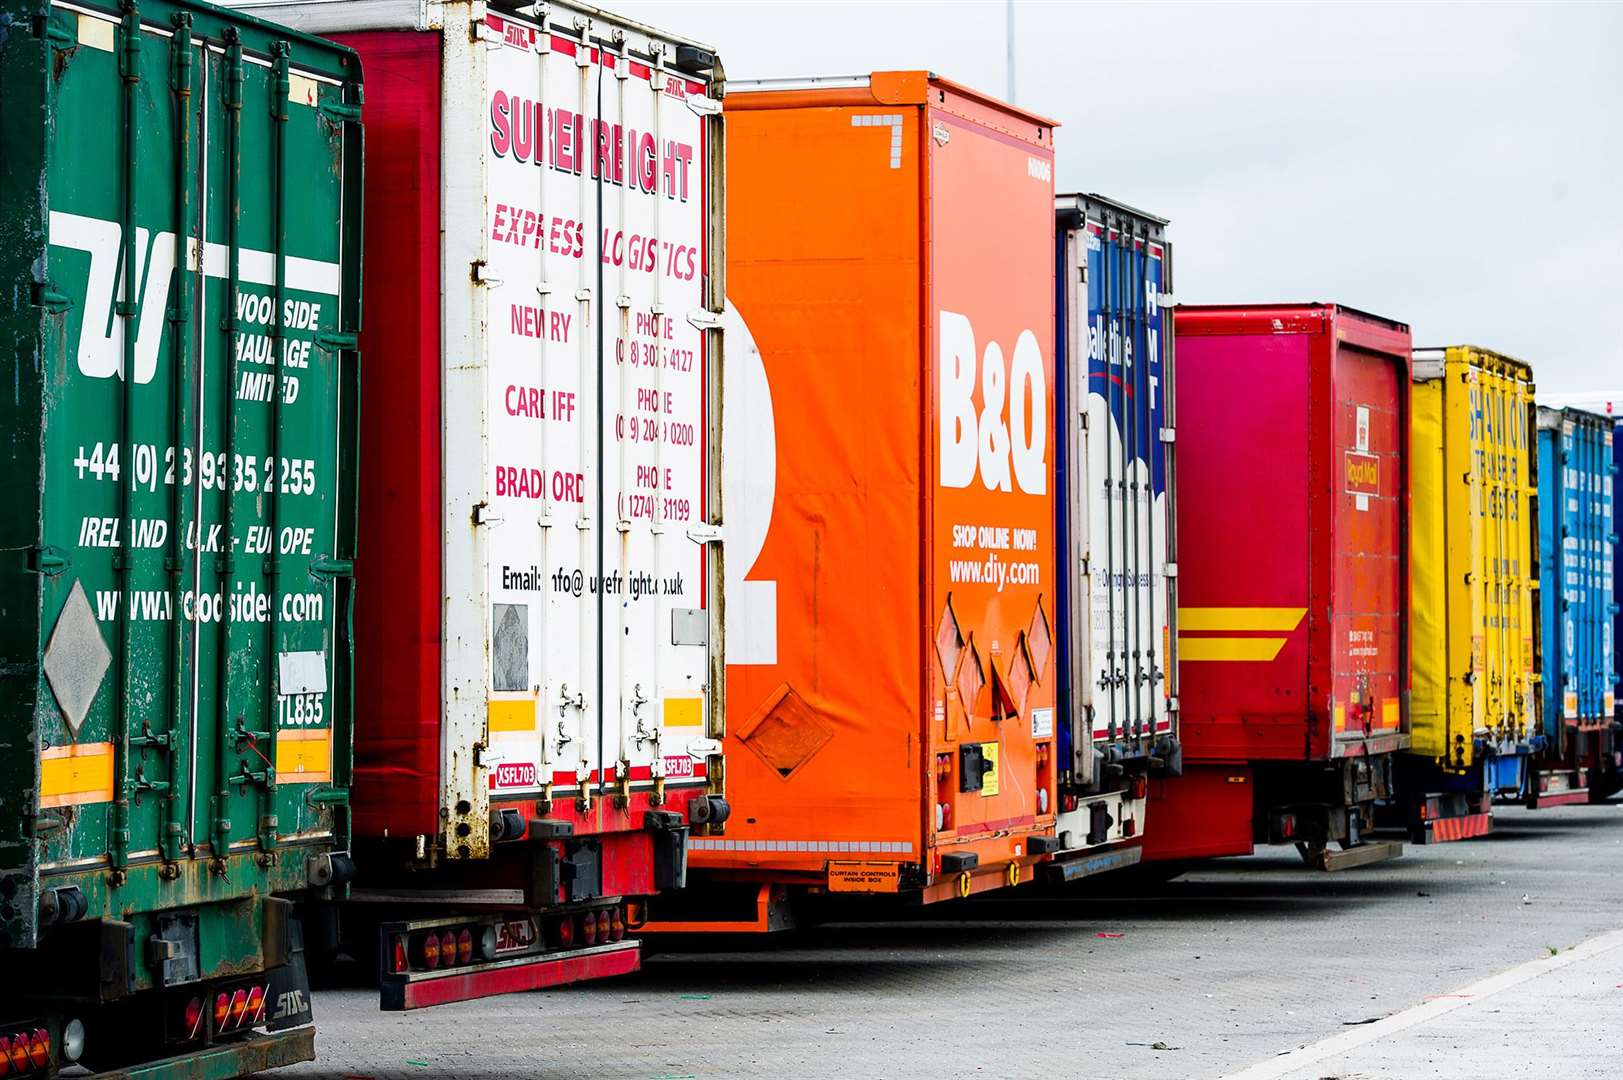 A lorry park and customs check area could be brought forward in Medway under special powers introduced by the government meaning it does not have to consult local residents or councils. Picture: Ant Clausen/Peel Ports